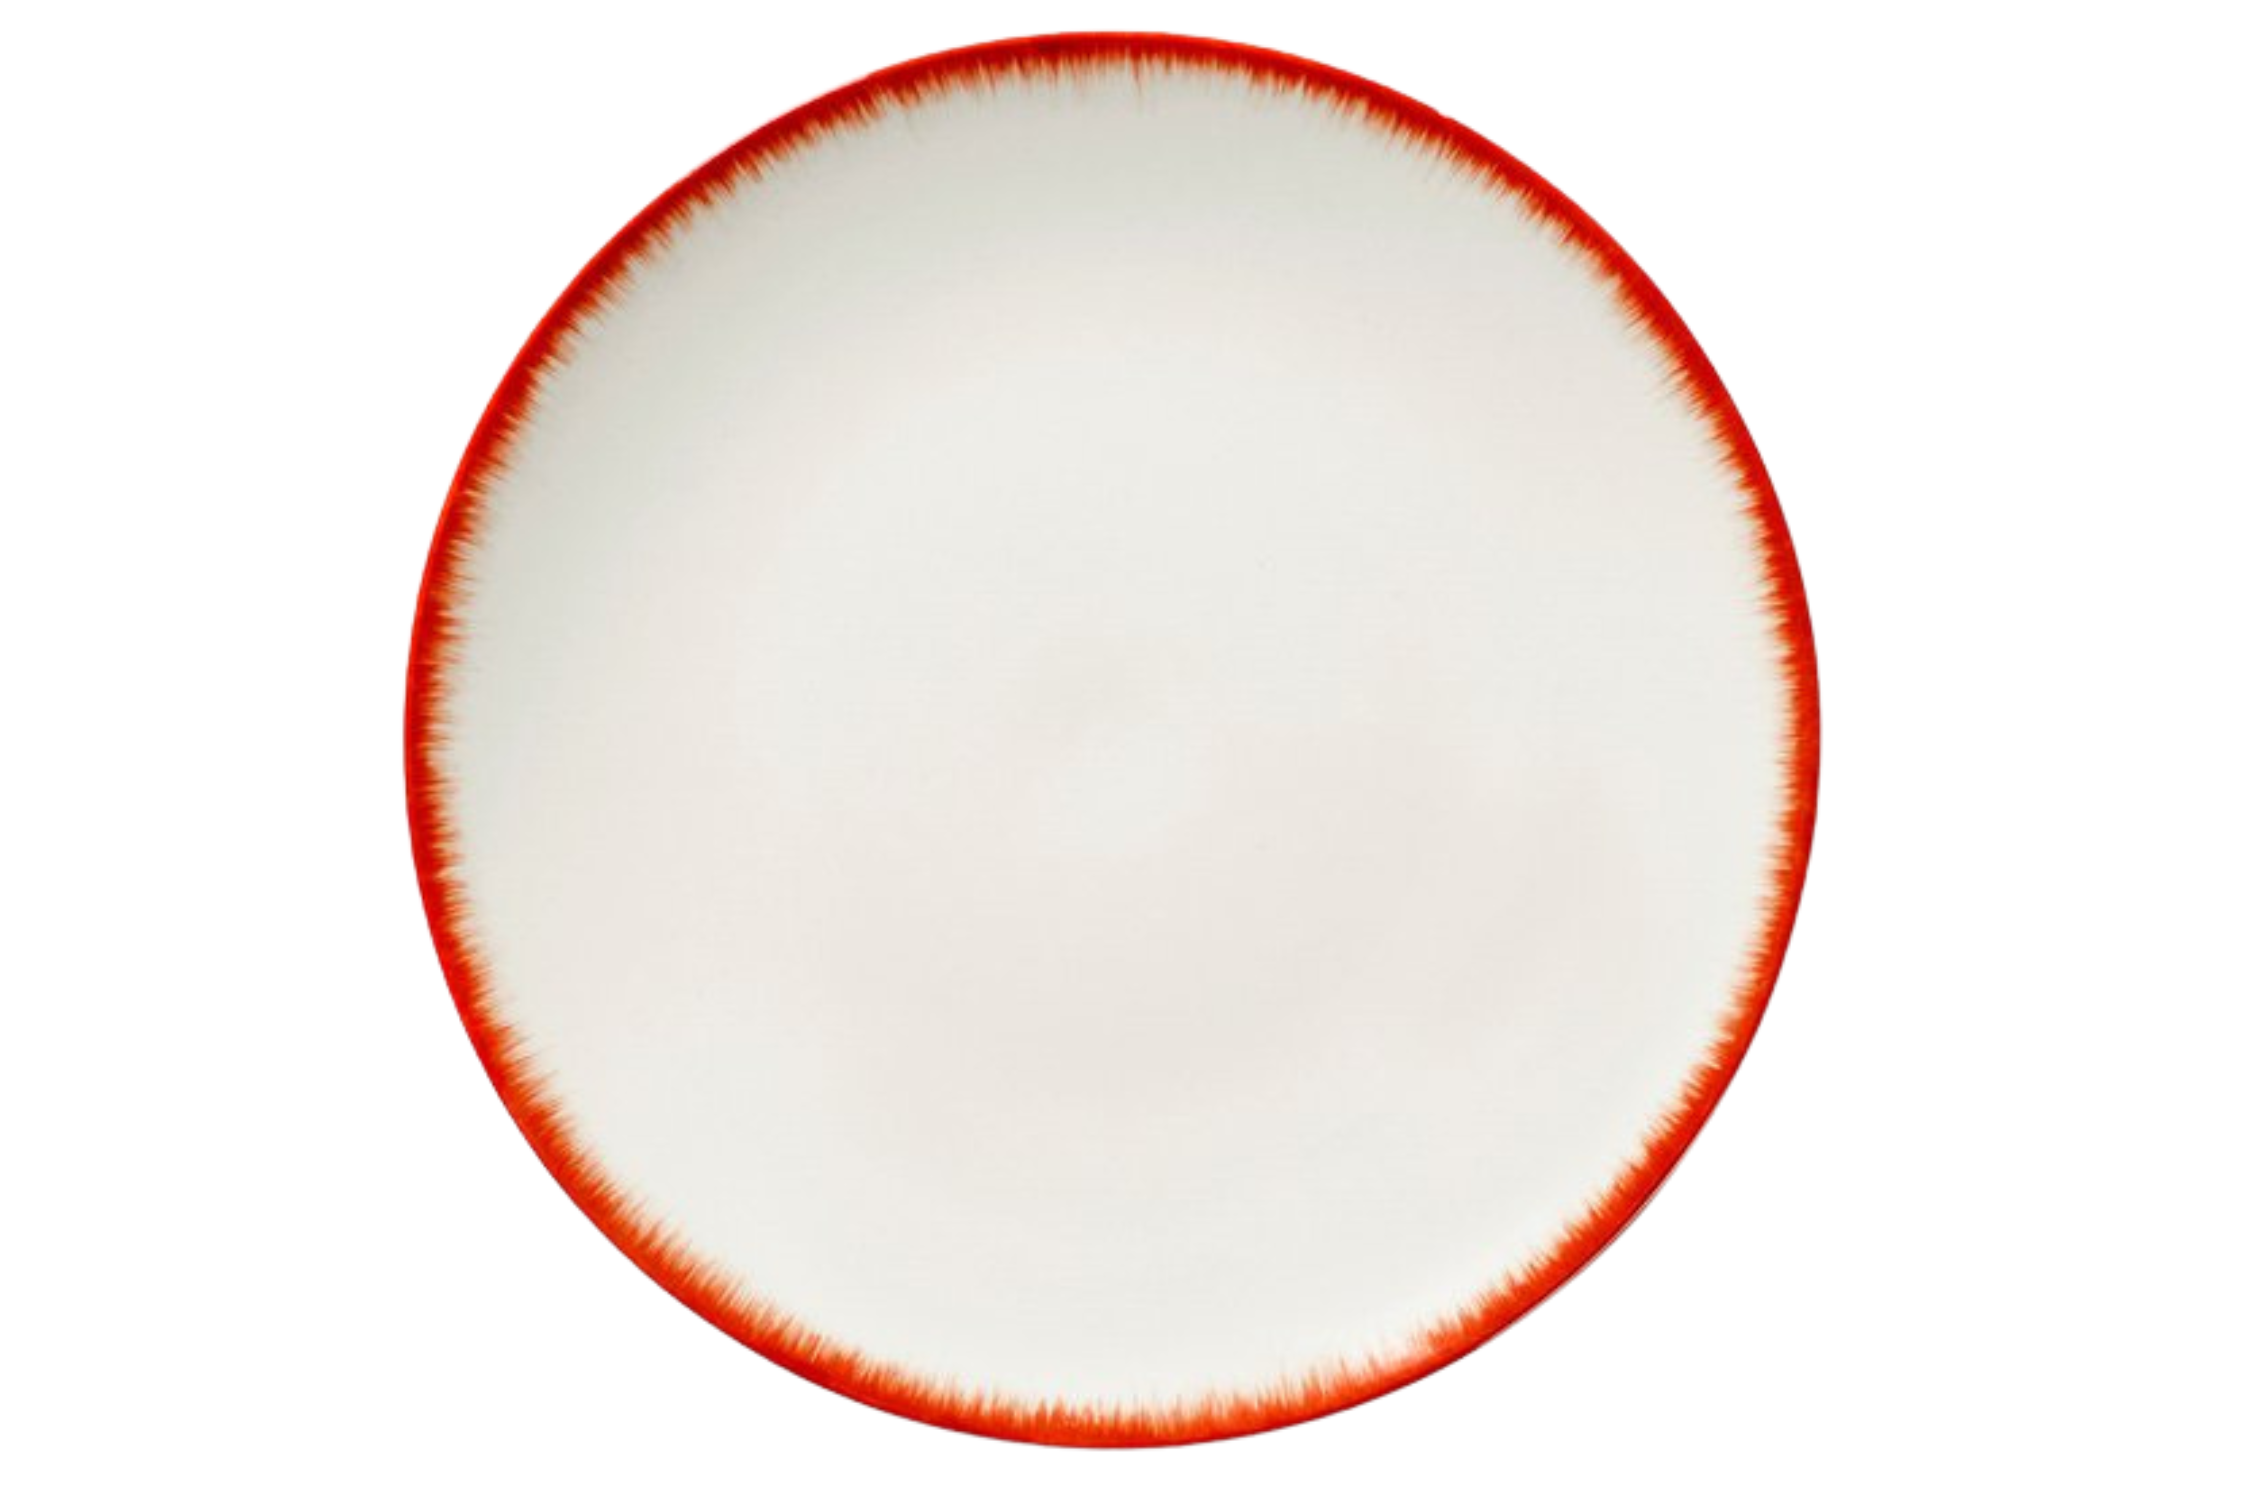 Serax Plate Dé Red Variation 2 - Set of 2 by Ann Demeulemeester